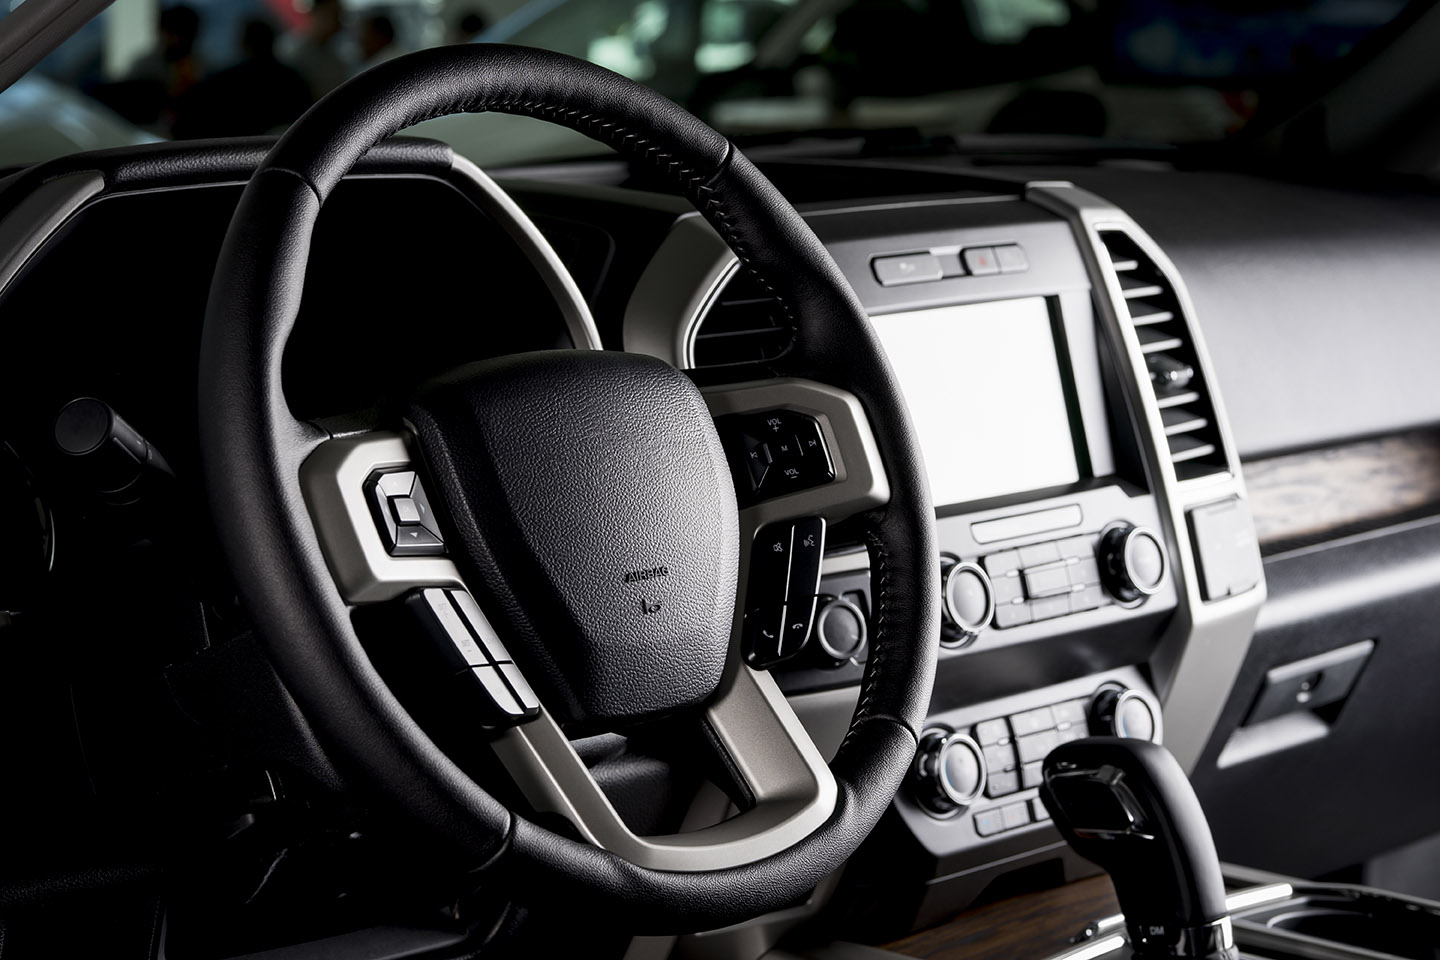 Modern pickup truck interior, touch screen panel, leather seats